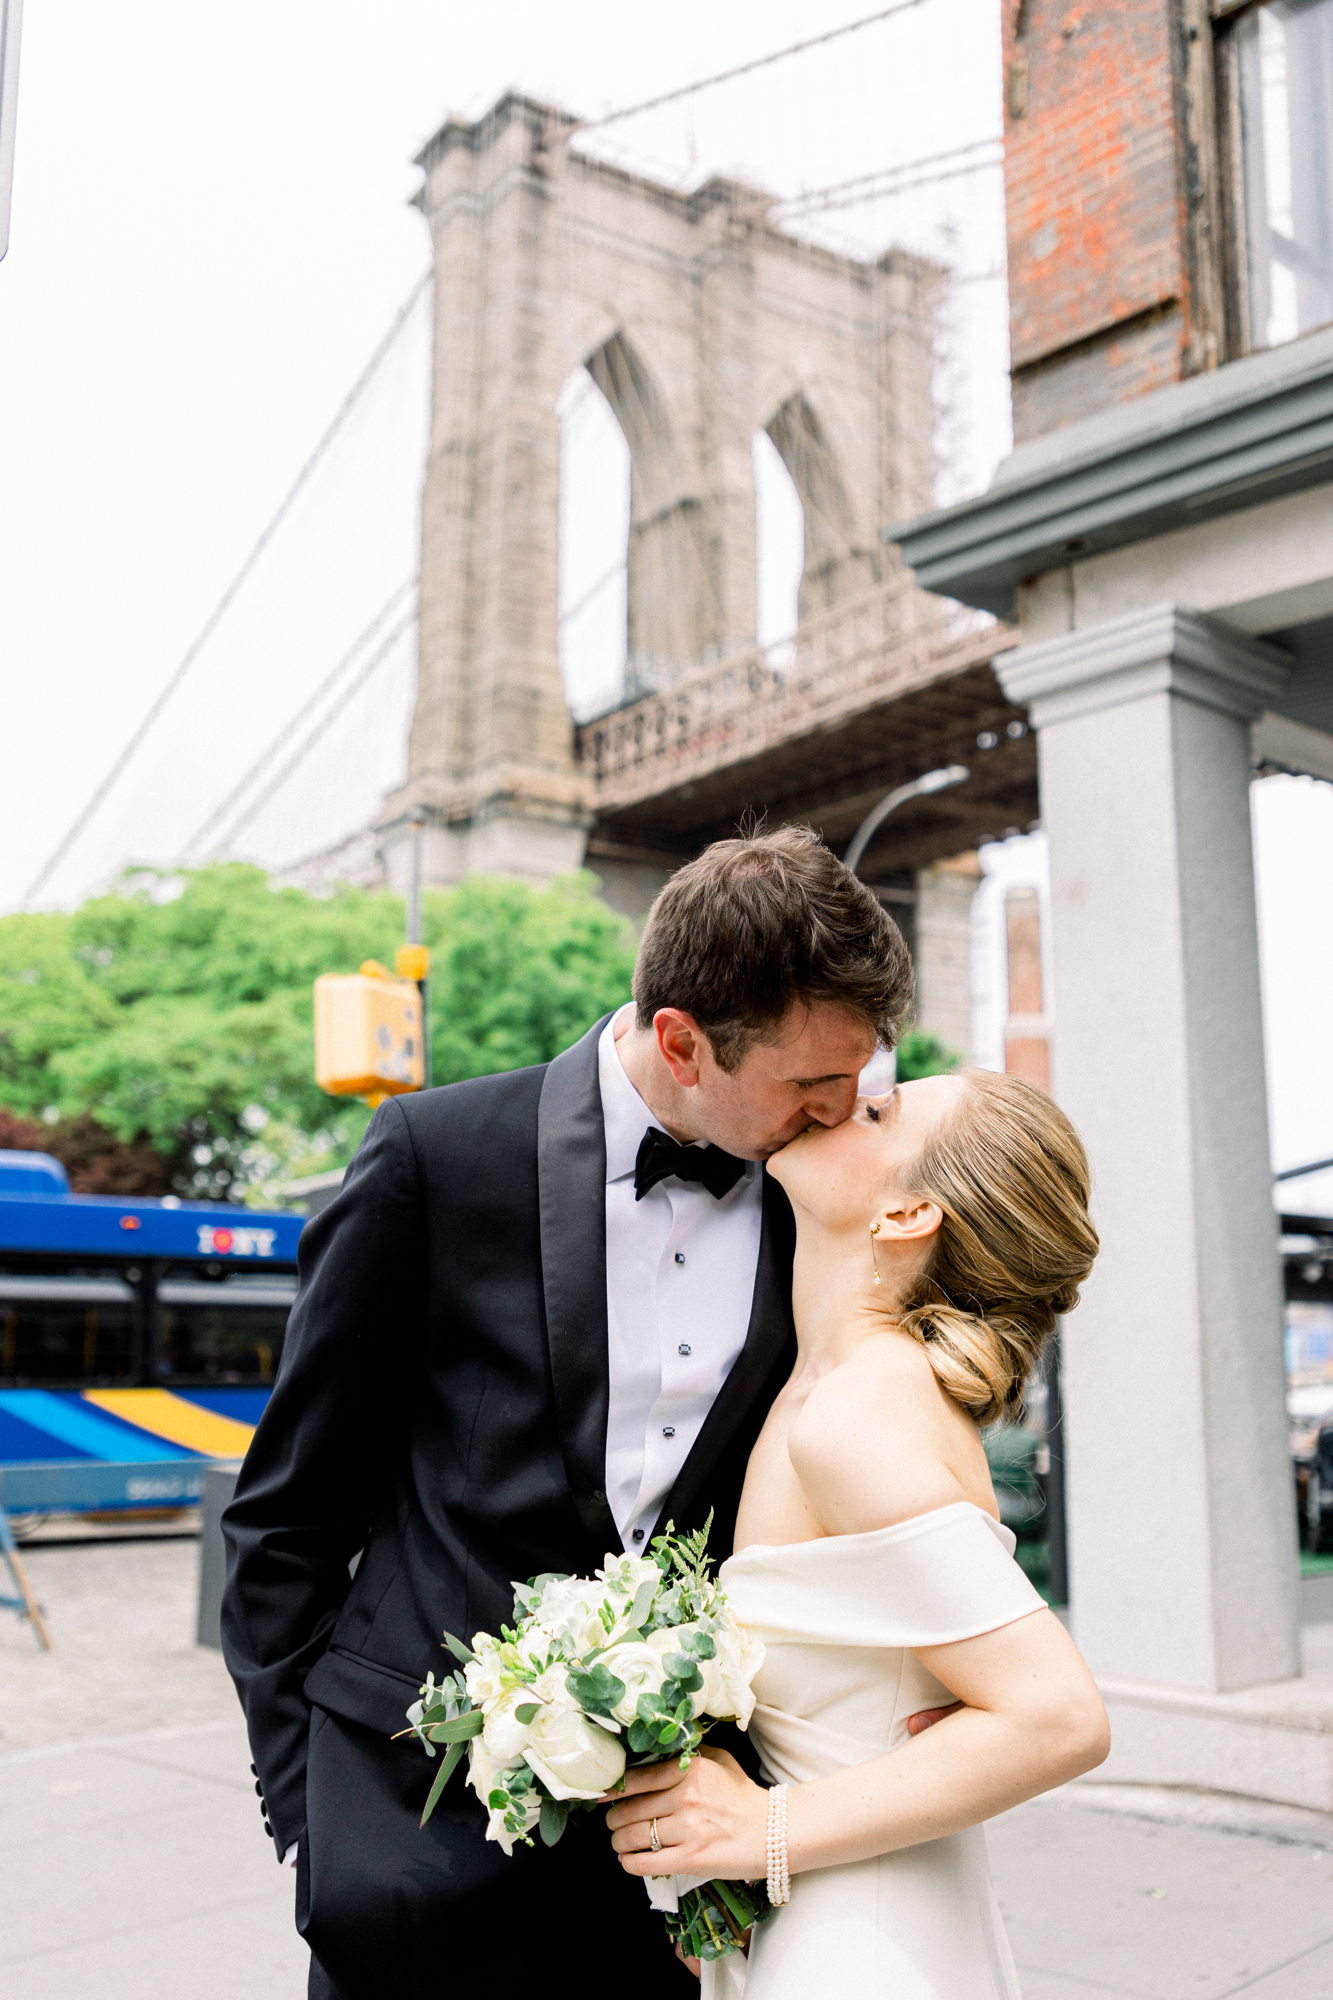 Timeless and Romantic Intimate Carousel Wedding in Dumbo